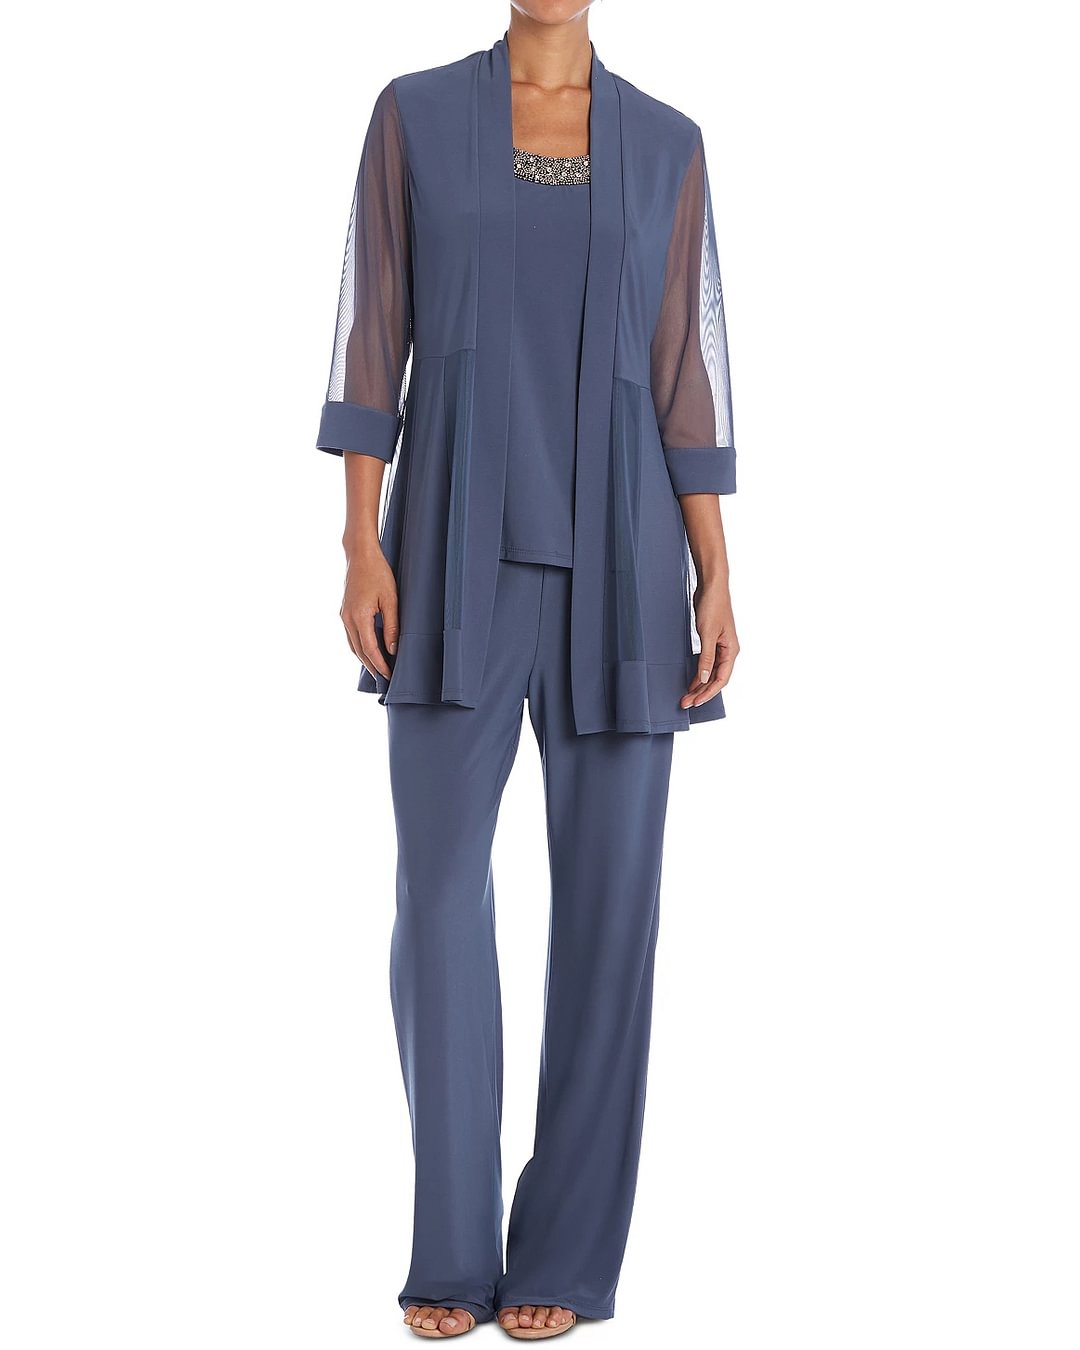 Embellished Layered-Look Pantsuit